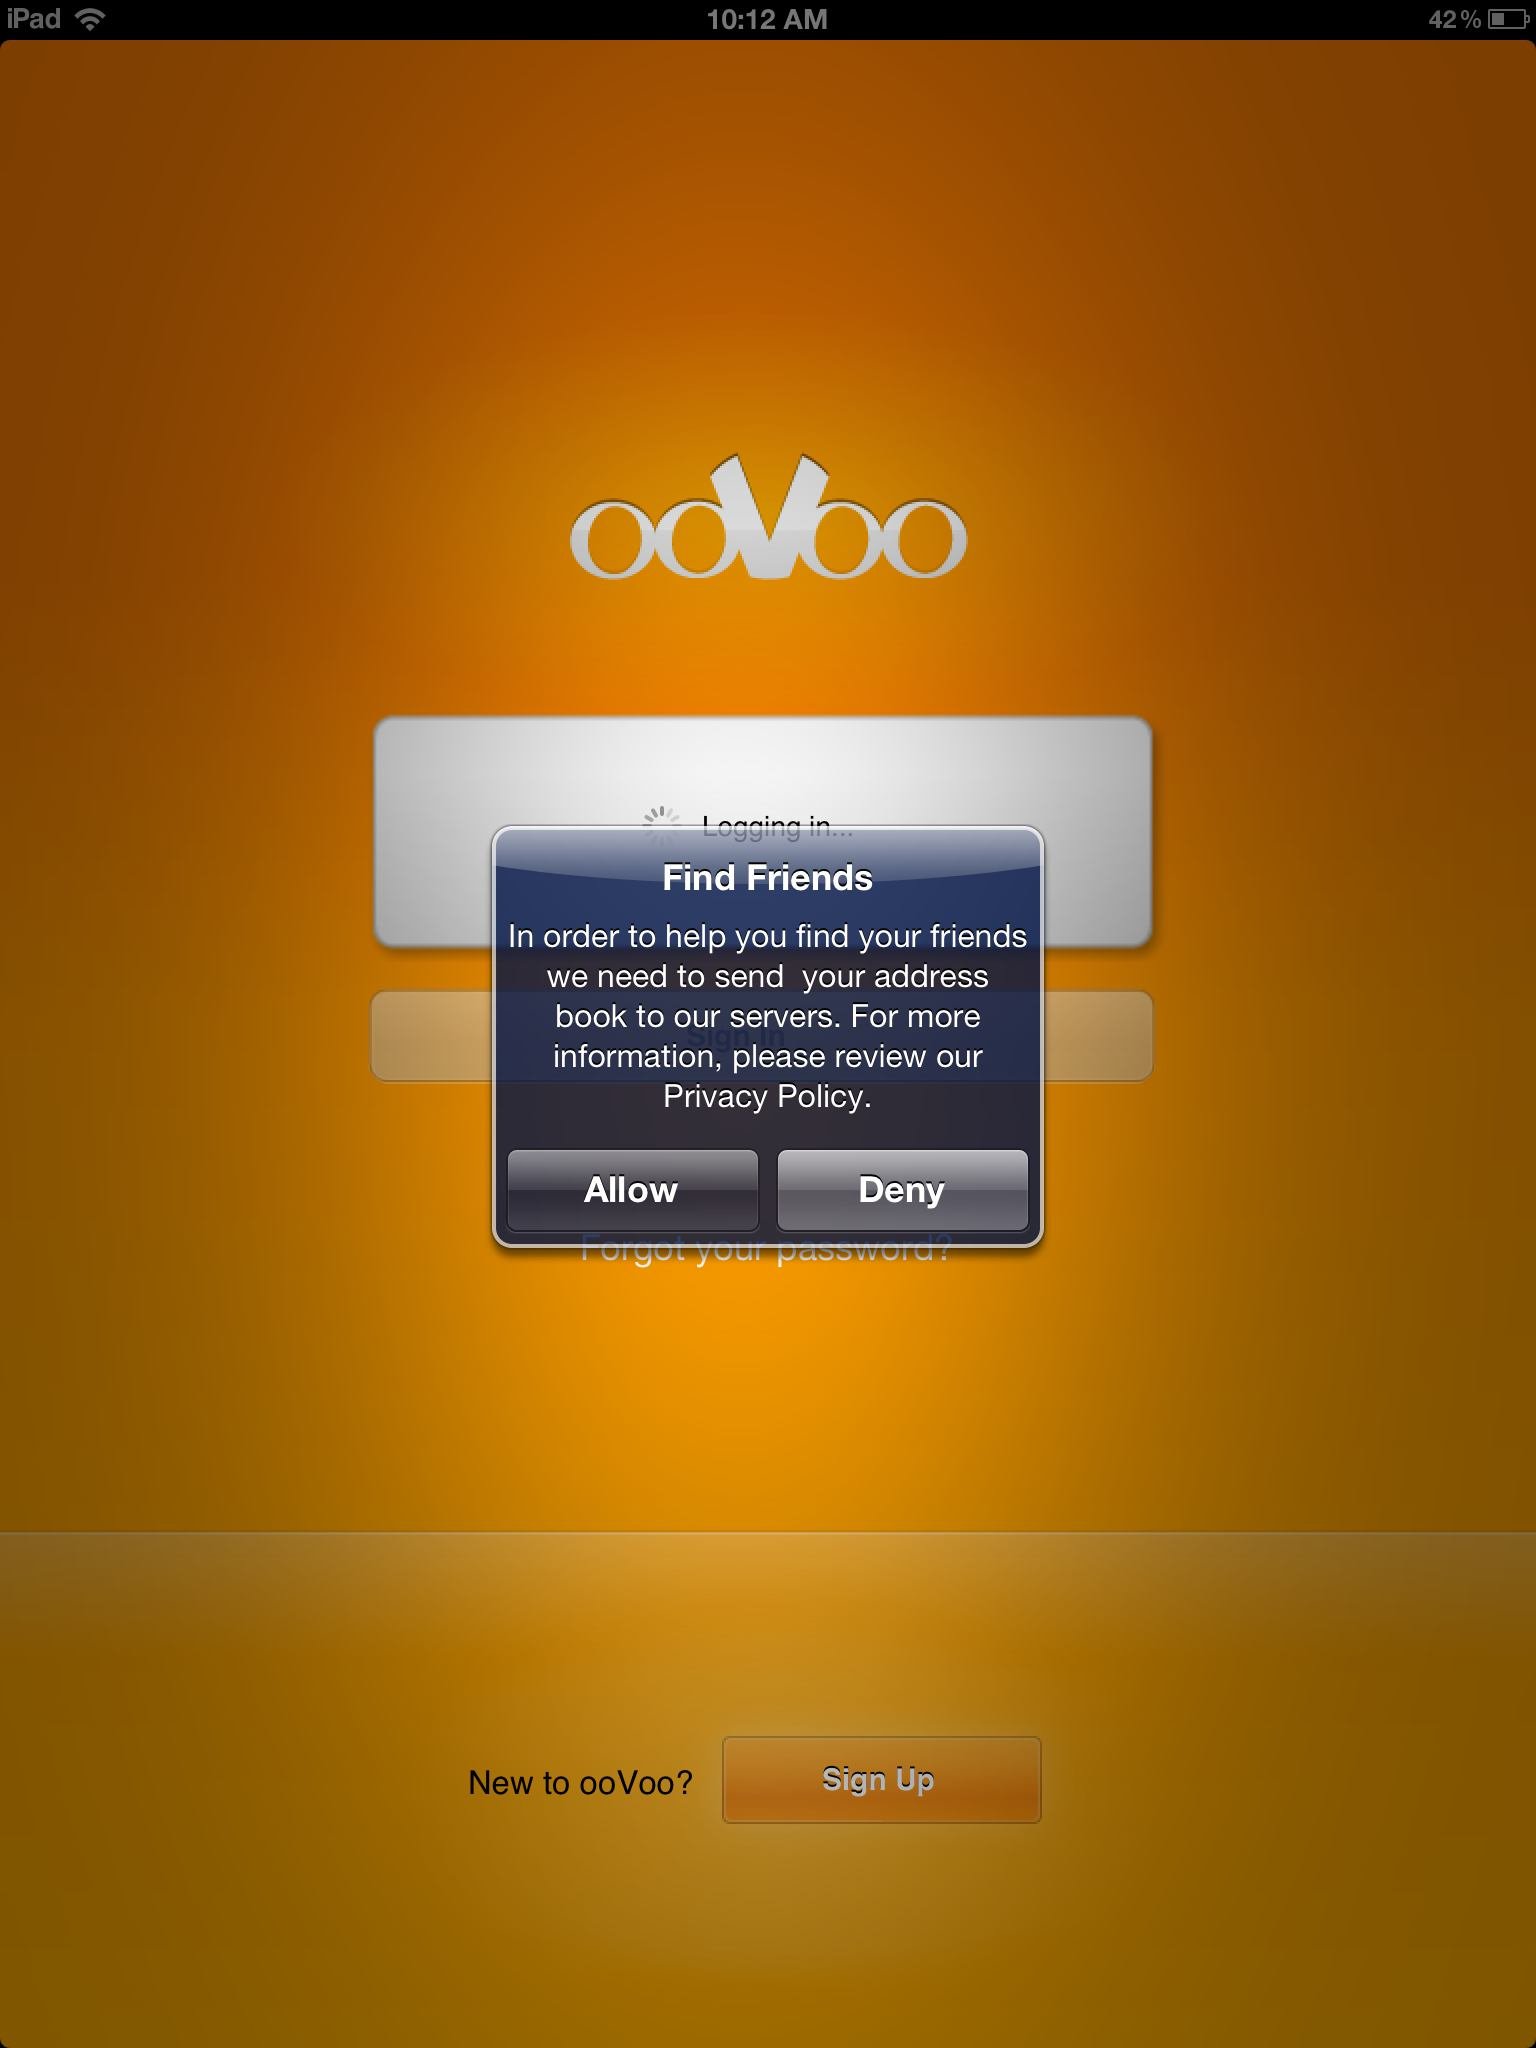 allow or deny oovoo to find contacts